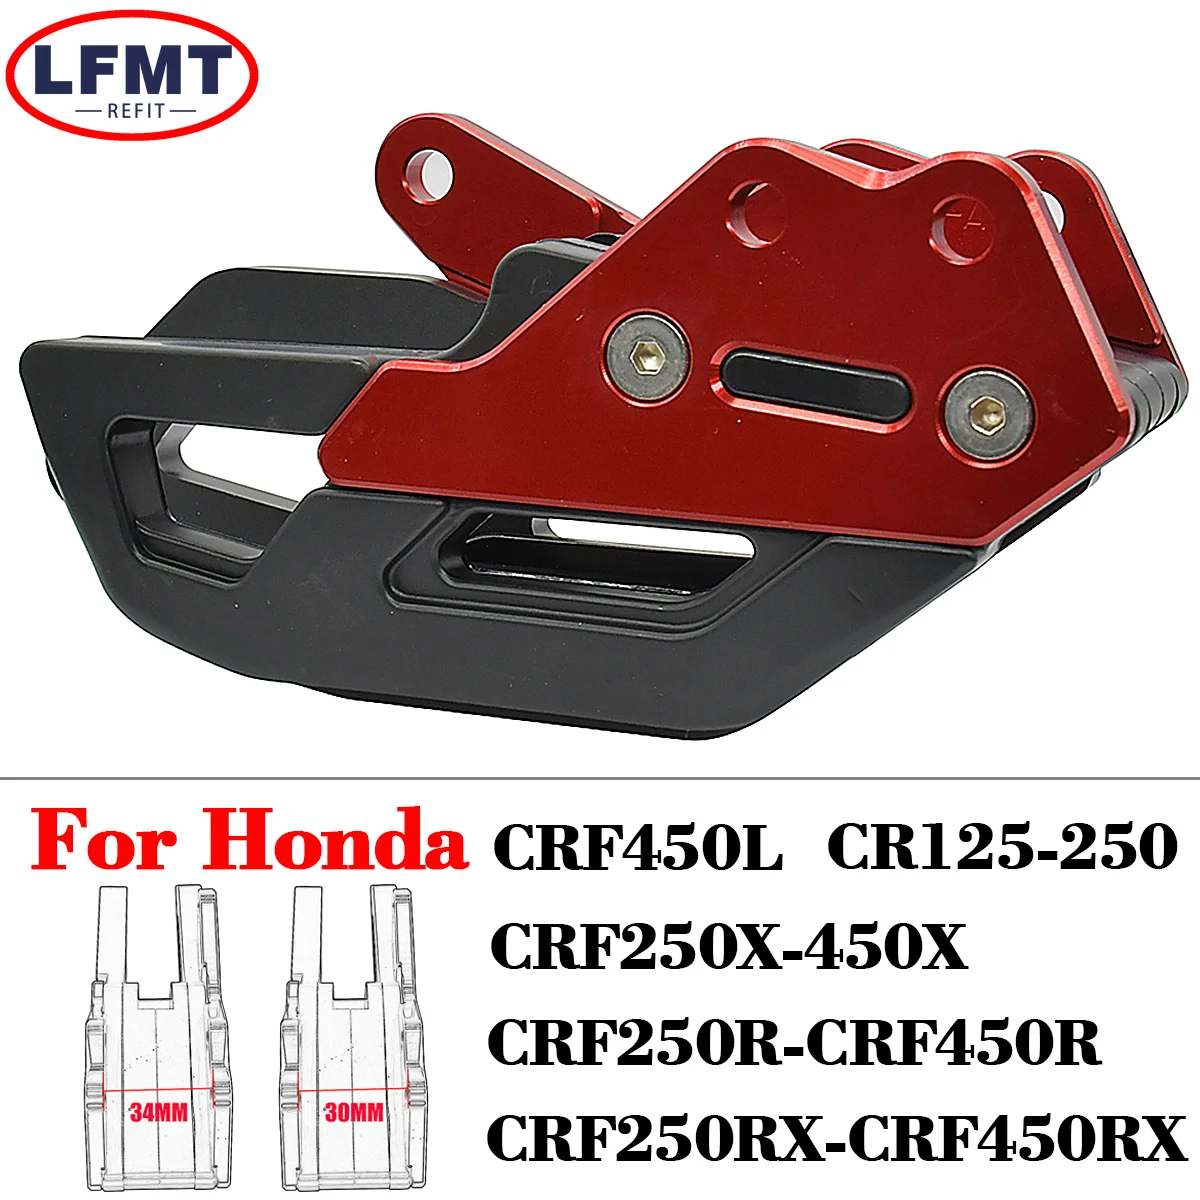 

Motorcycle CNC Chain Guide Guard For Honda CRF250R CRF450R CR125 CR250 CRF250RX CRF450RX CRF 250R 450R CR 125 250 R RX 2005-2021